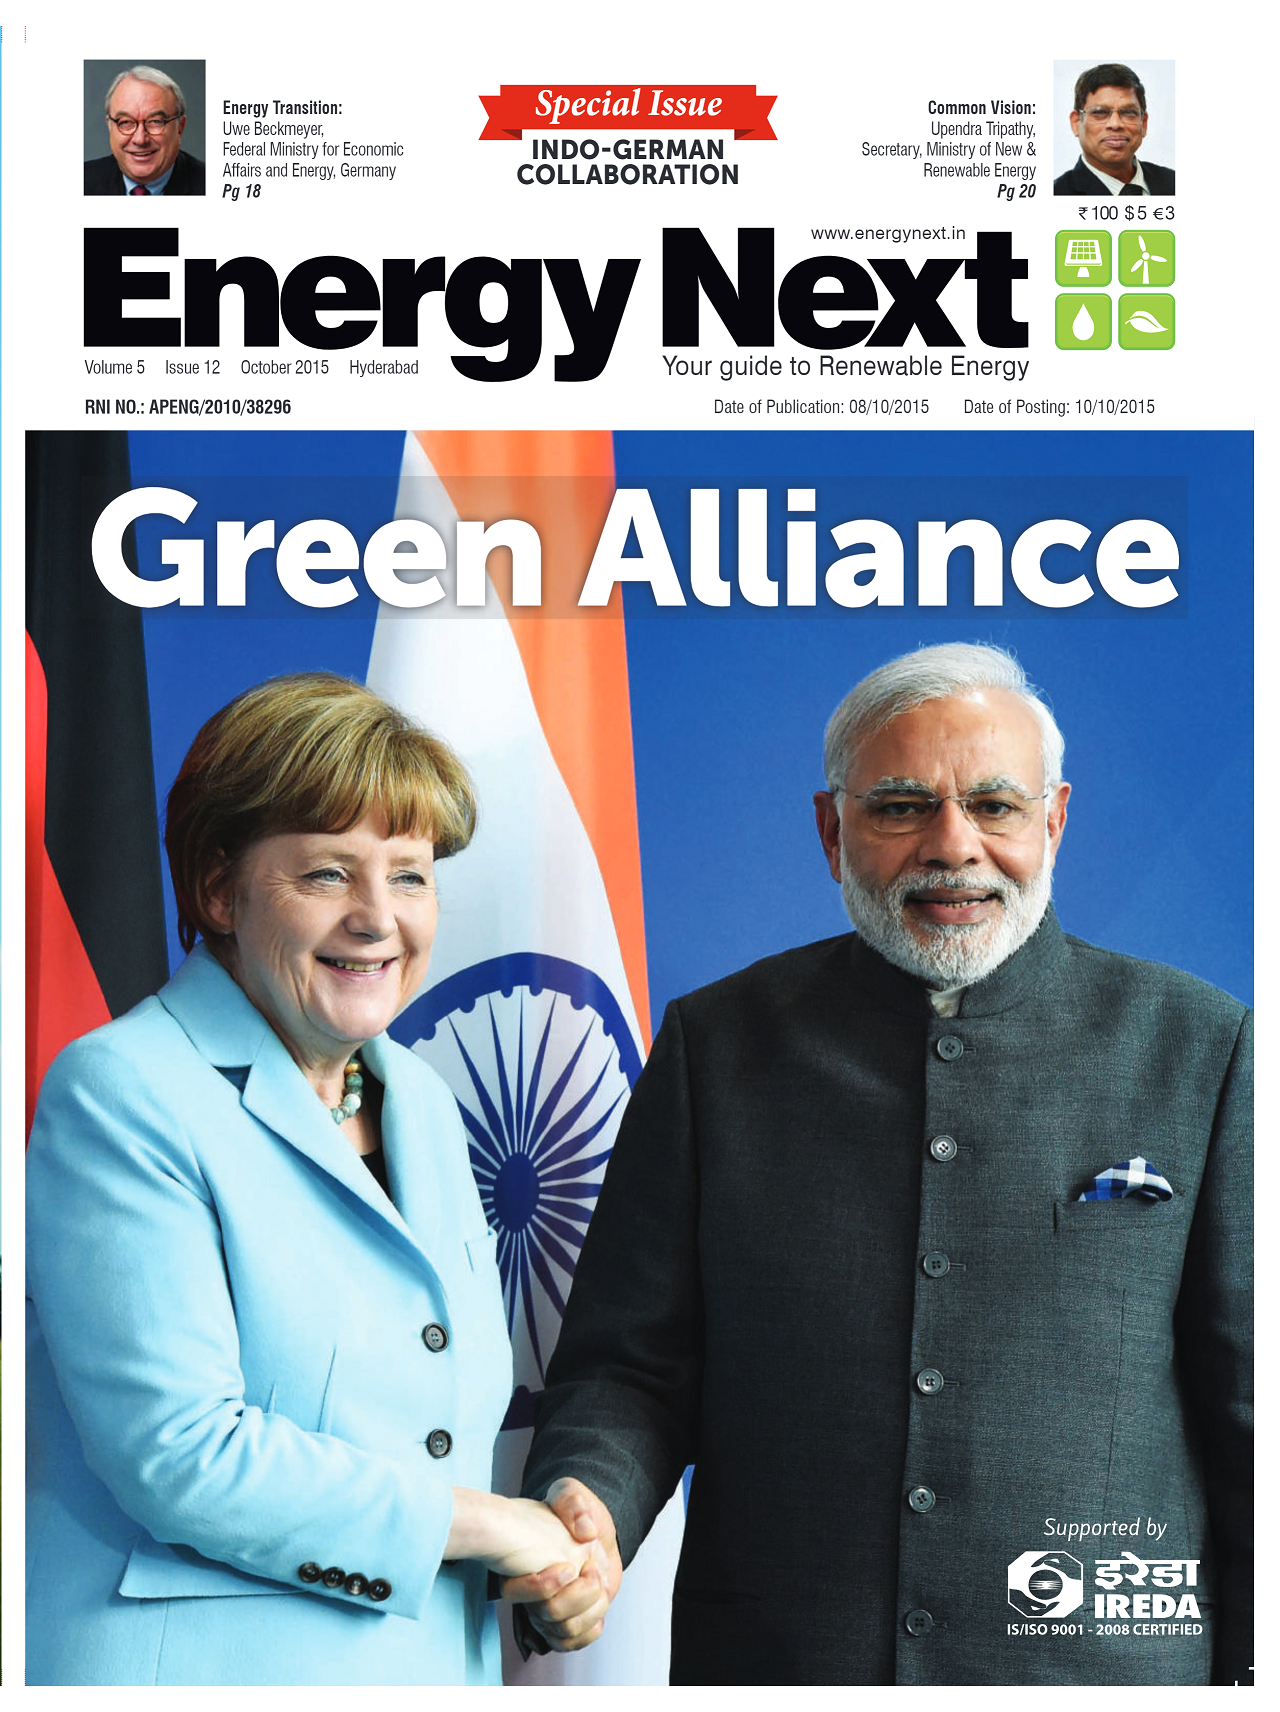 EnergyNext vol 05 issue 12 Oct 2015